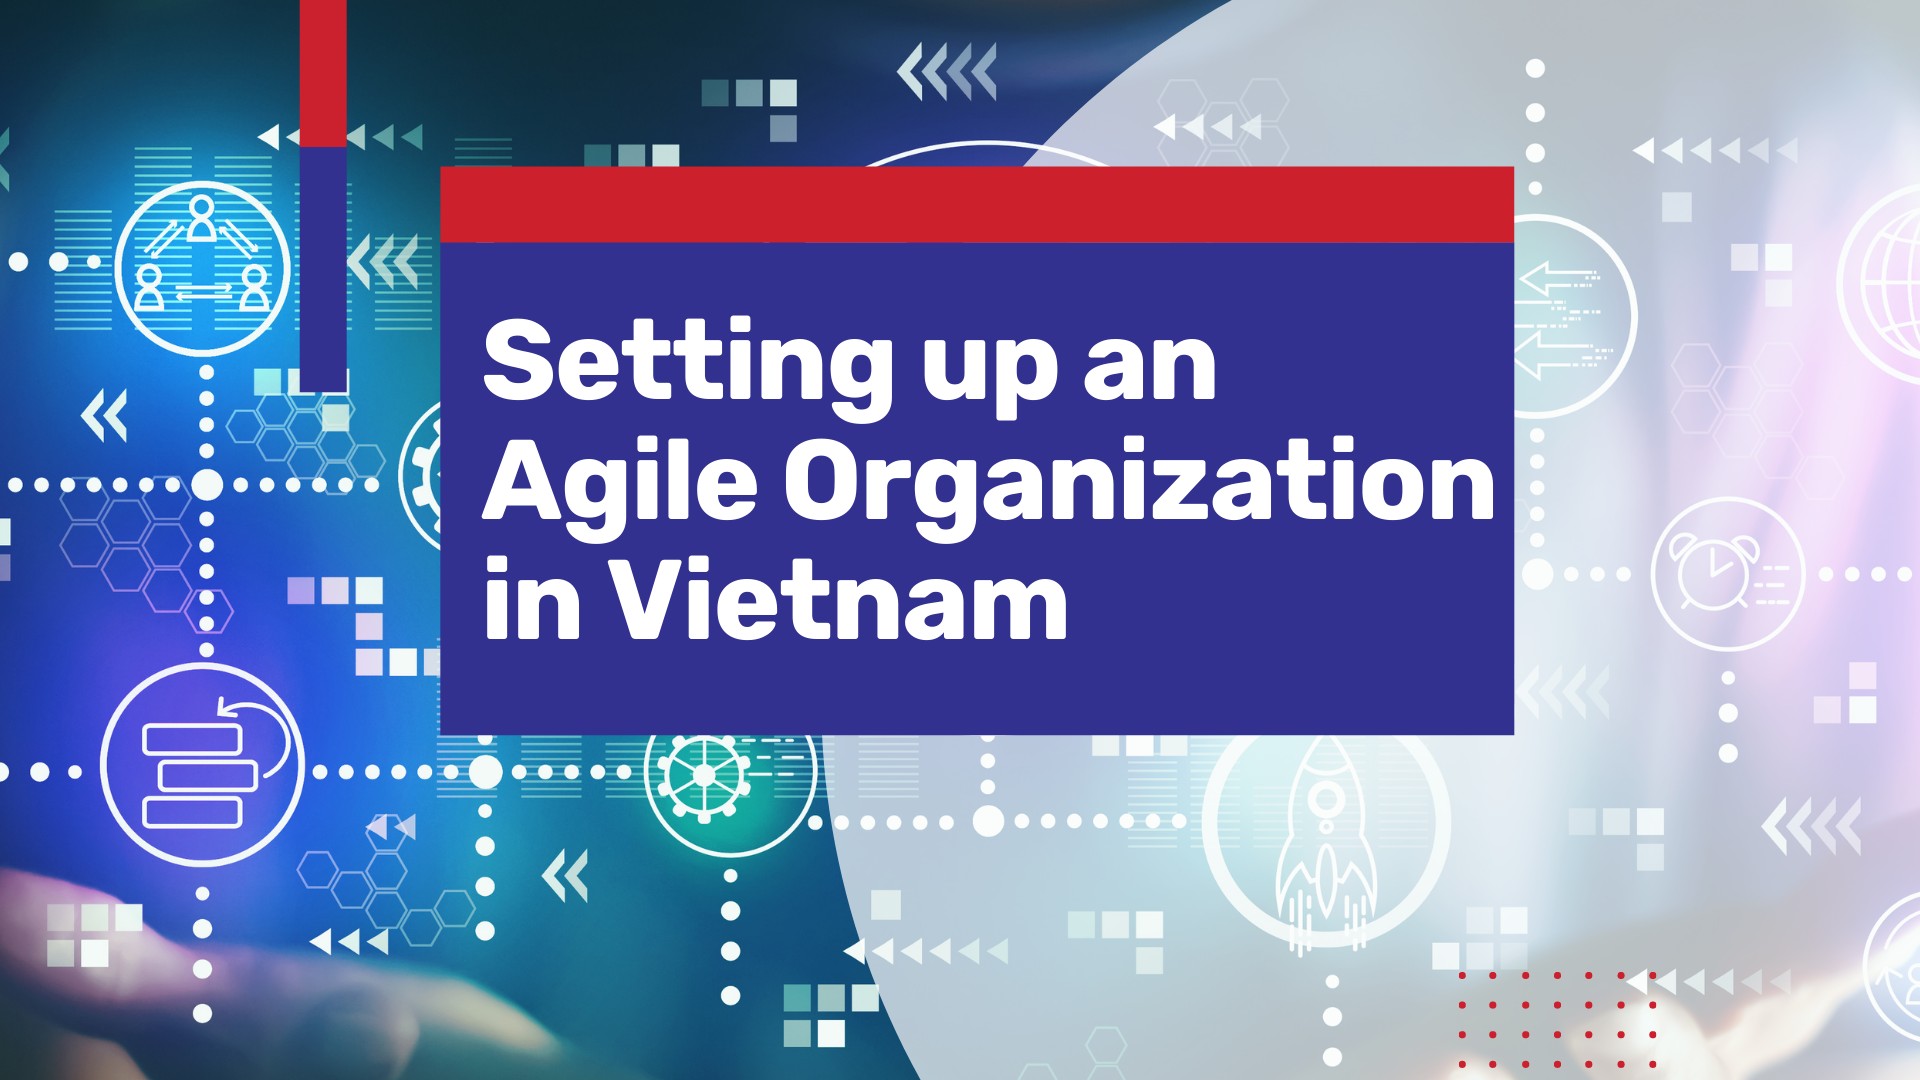 Benefits of Setting up an Agile Organization in Vietnam